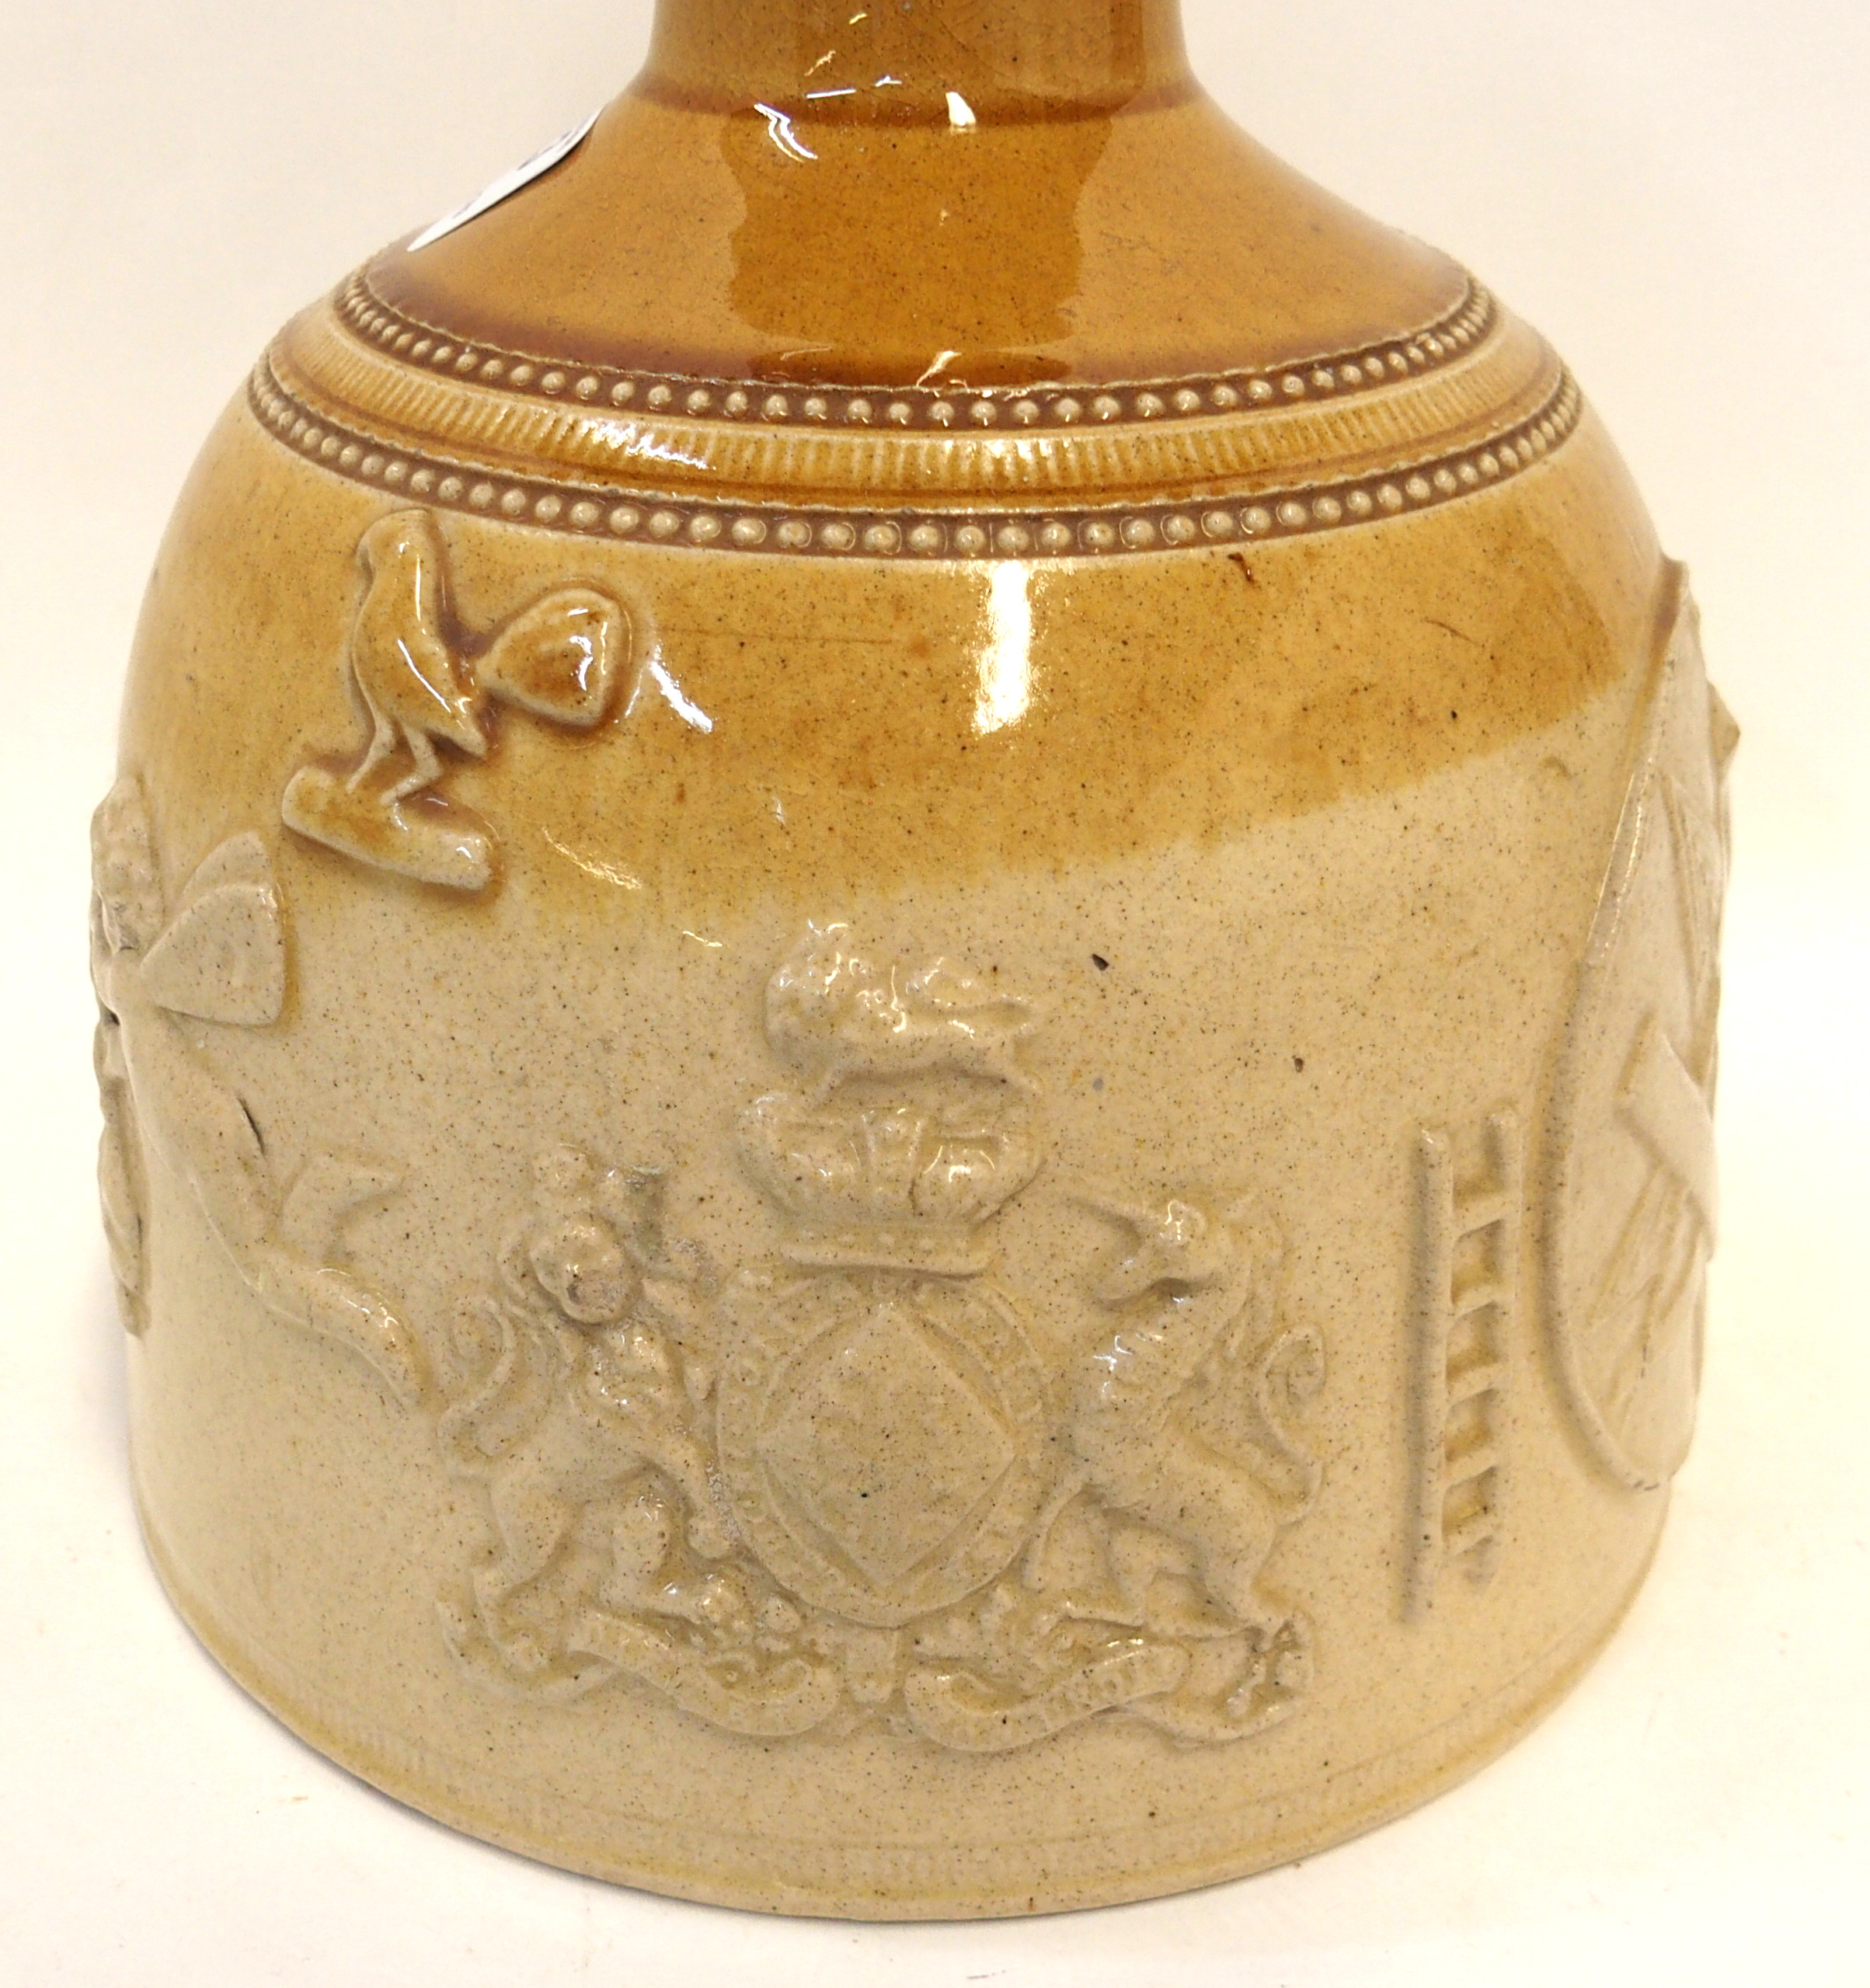 A Mason's Mallet whisky decanter in brown and tan glaze with raised Masonic symbols with central - Image 5 of 6